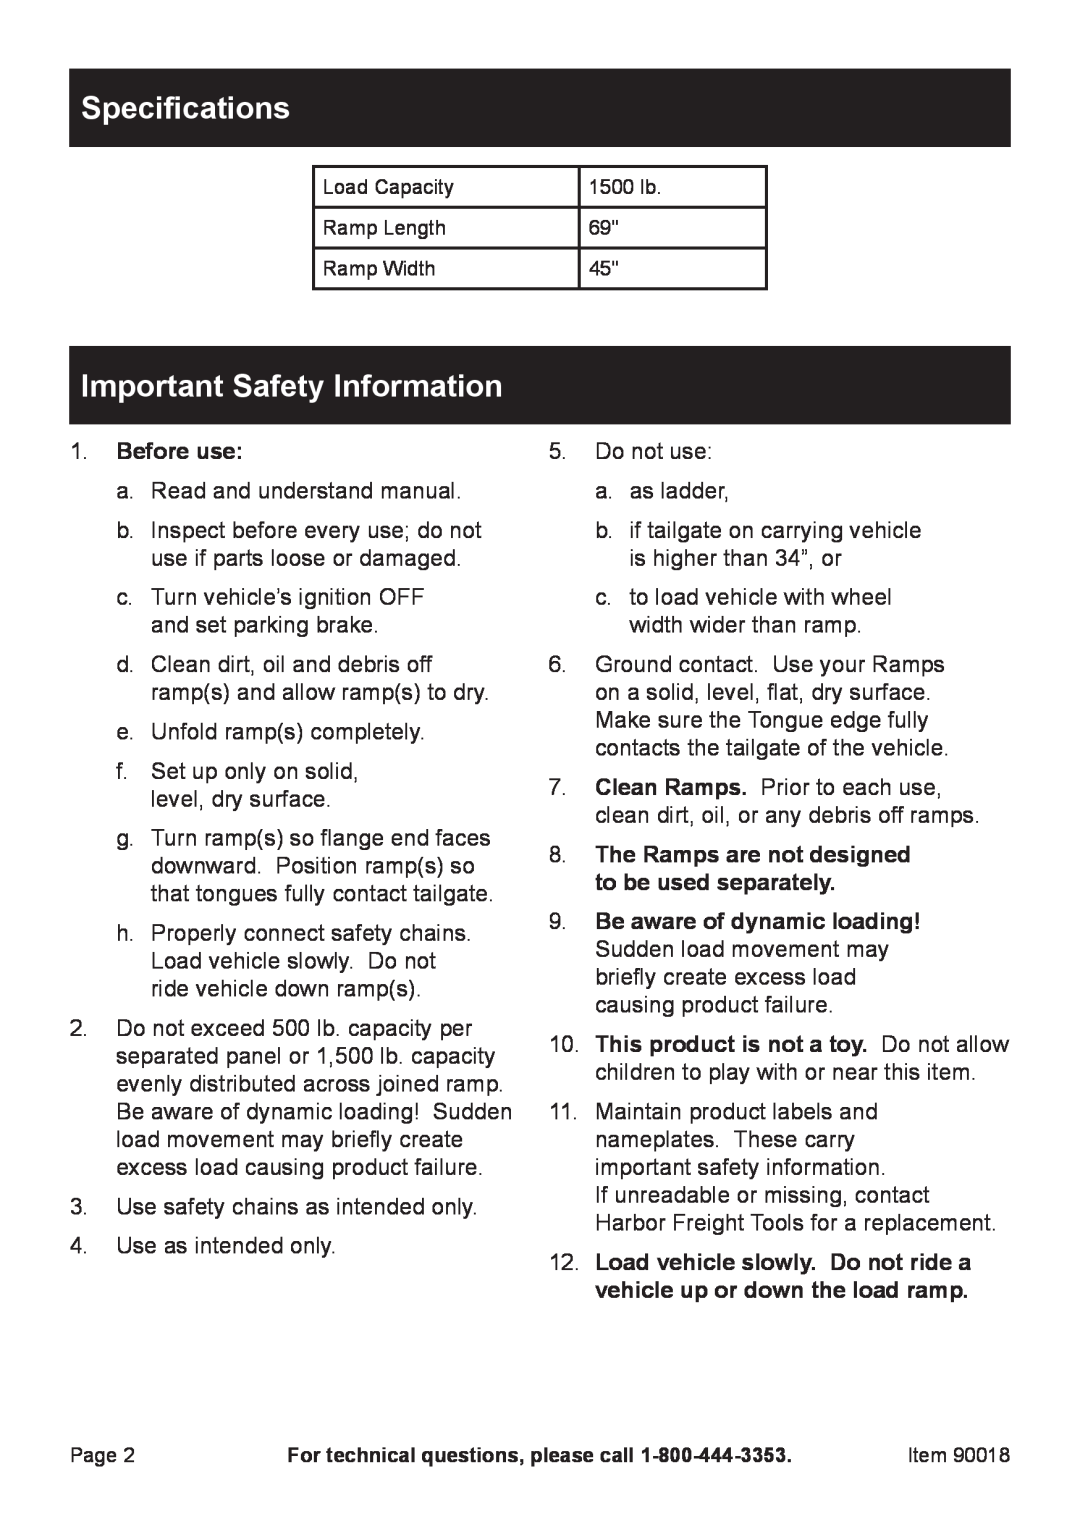 Zweita  Co 90018 manual Specifications, Important Safety Information 